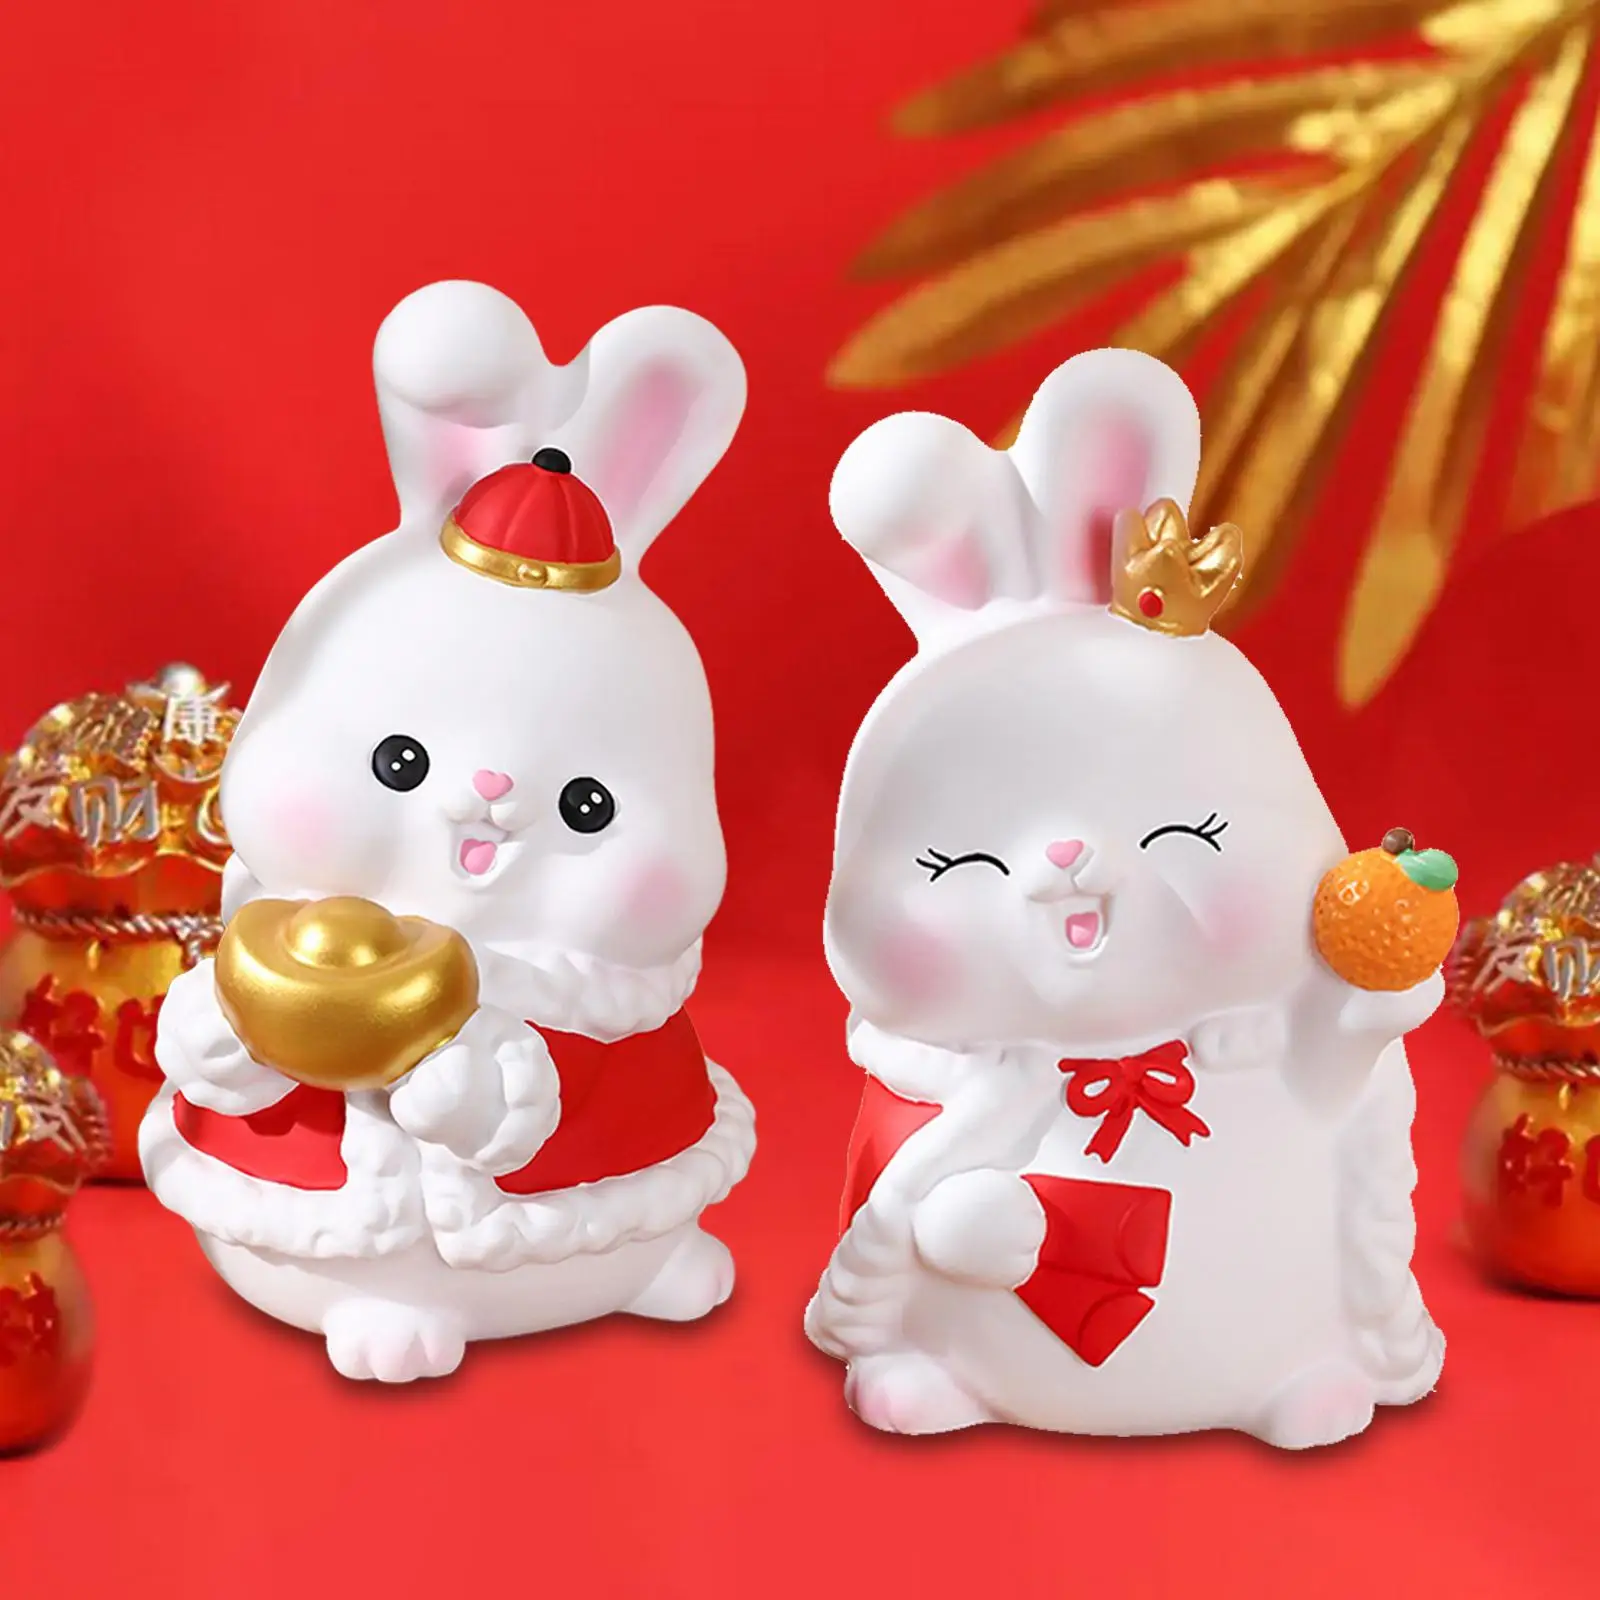 Small Rabbit Piggy Bank Collection Statue Animal Figurine Money Saving Box for Spring Festival Tabletop Birthday Ornament Gift